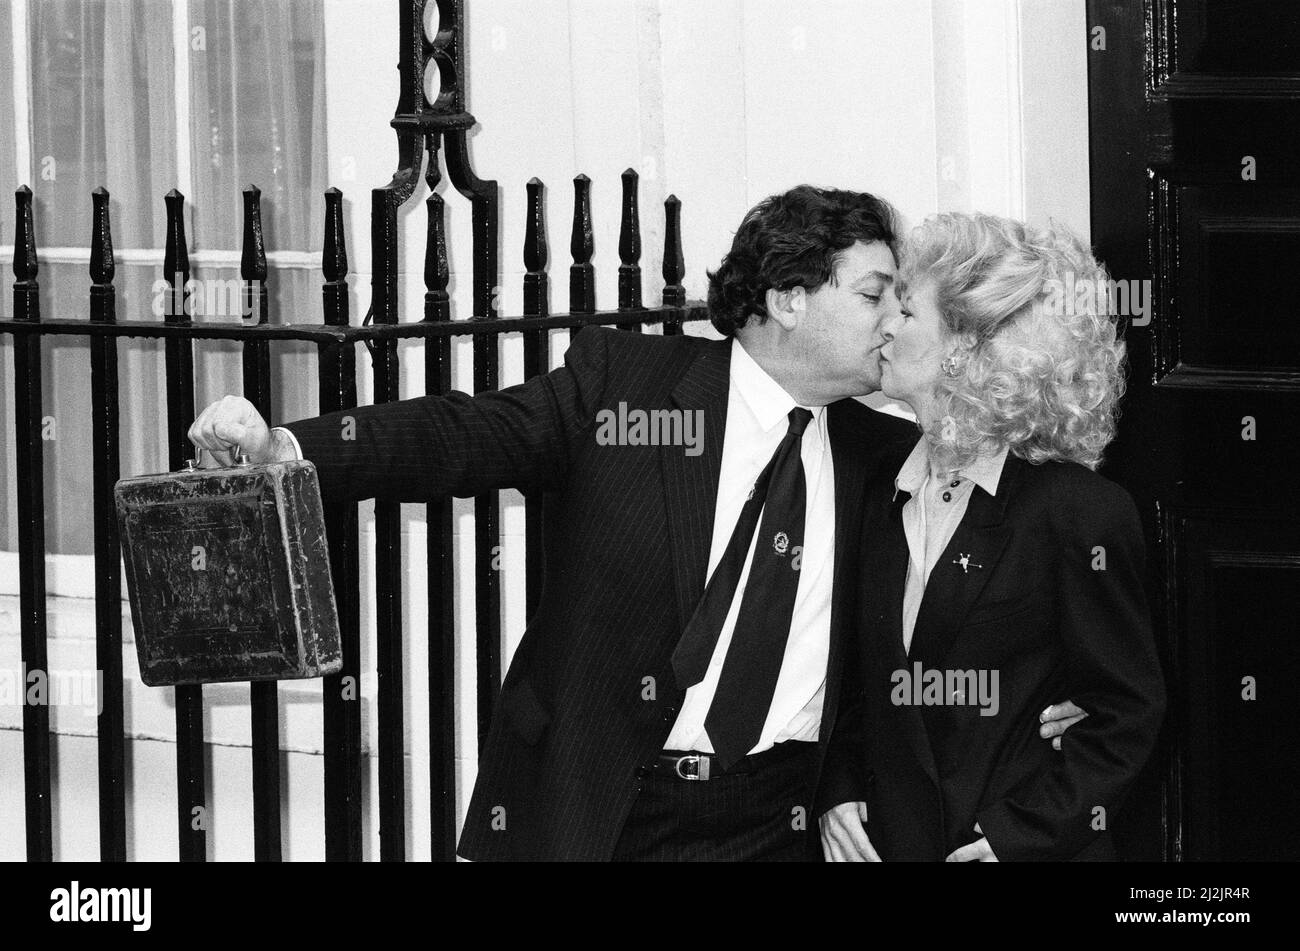 The Chancellor of the Exchequer, Nigel Lawson, and his wife Therese. Pictured on Budget Day, leaving Downing Street for the House of Commons. London. 15th March 1988. Stock Photo